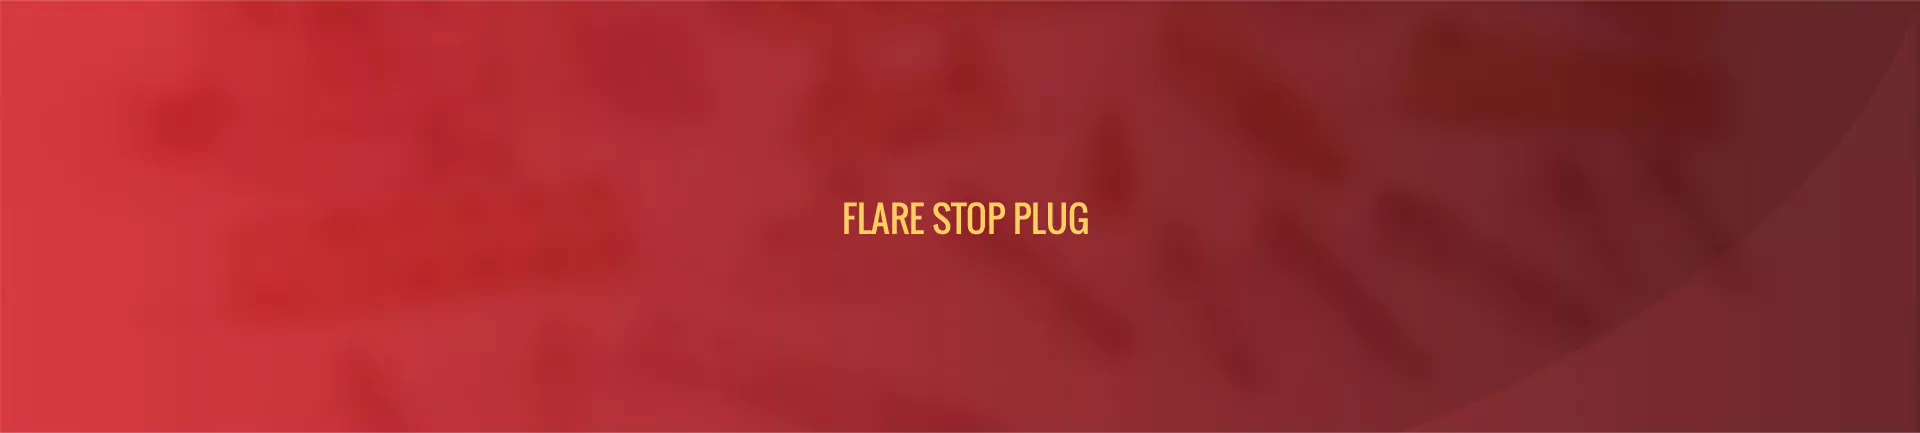 flare_stop_plug-banner